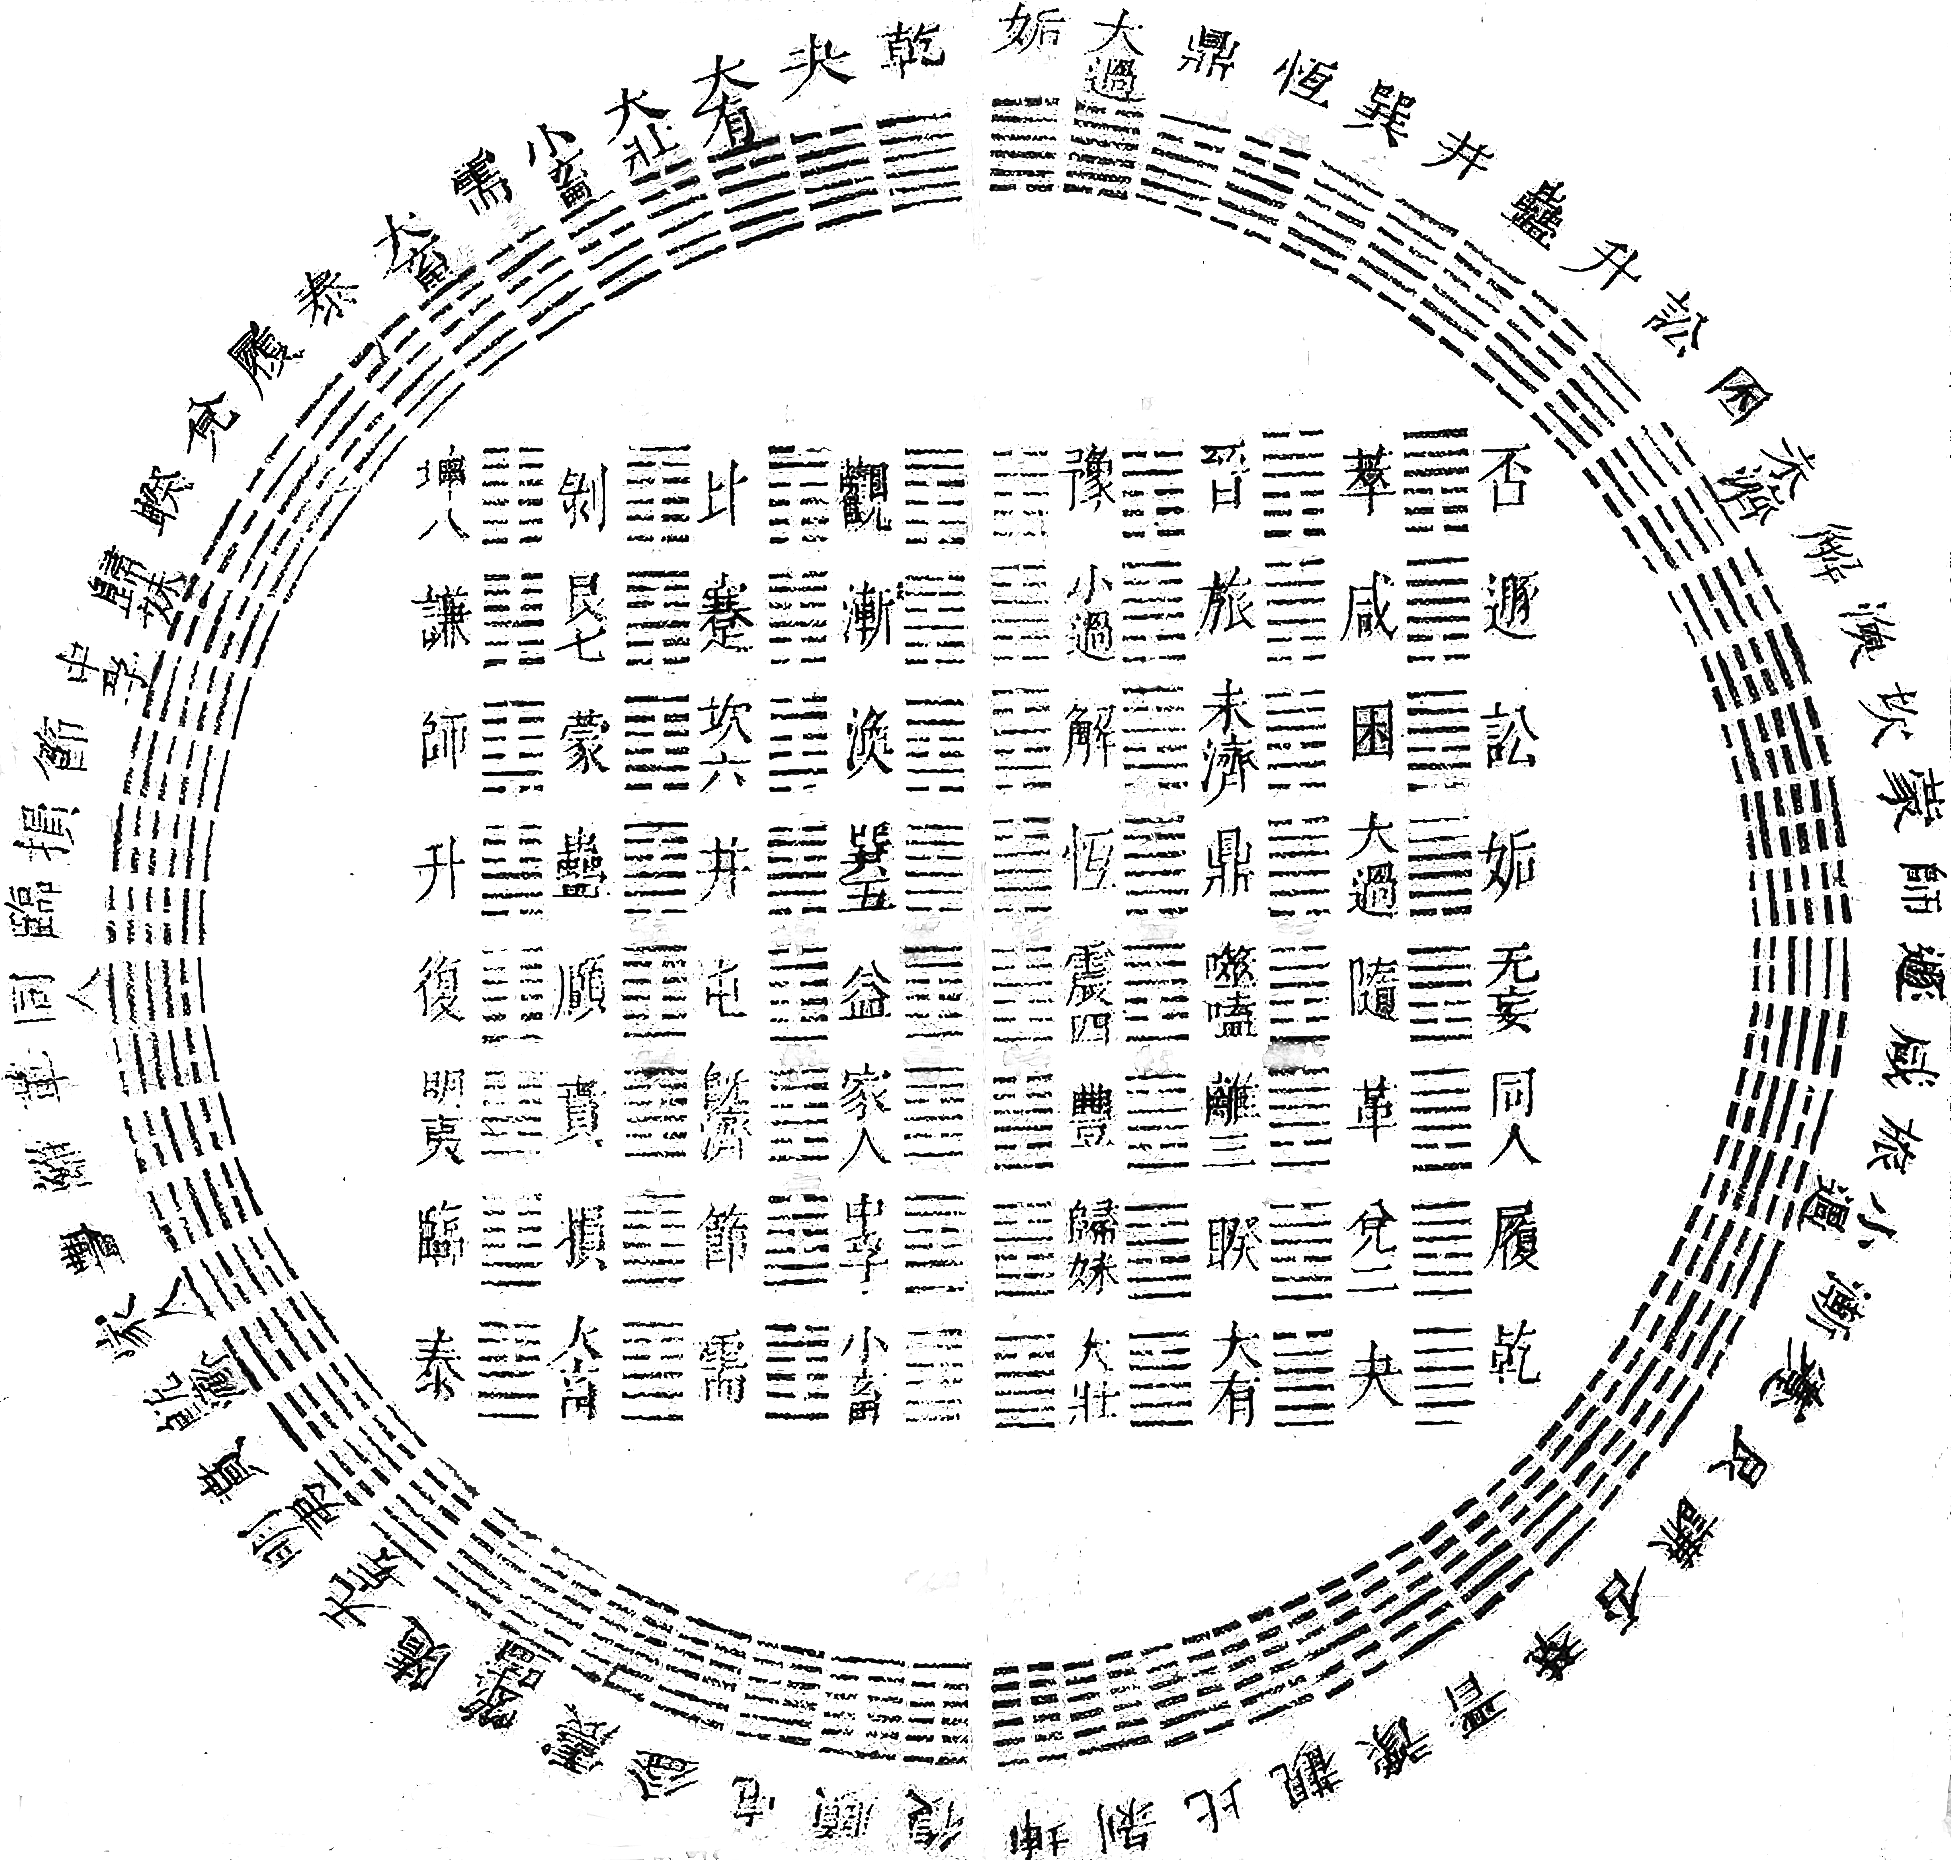 circular configurations of I Ching hexagrams : As communicated to Leibniz